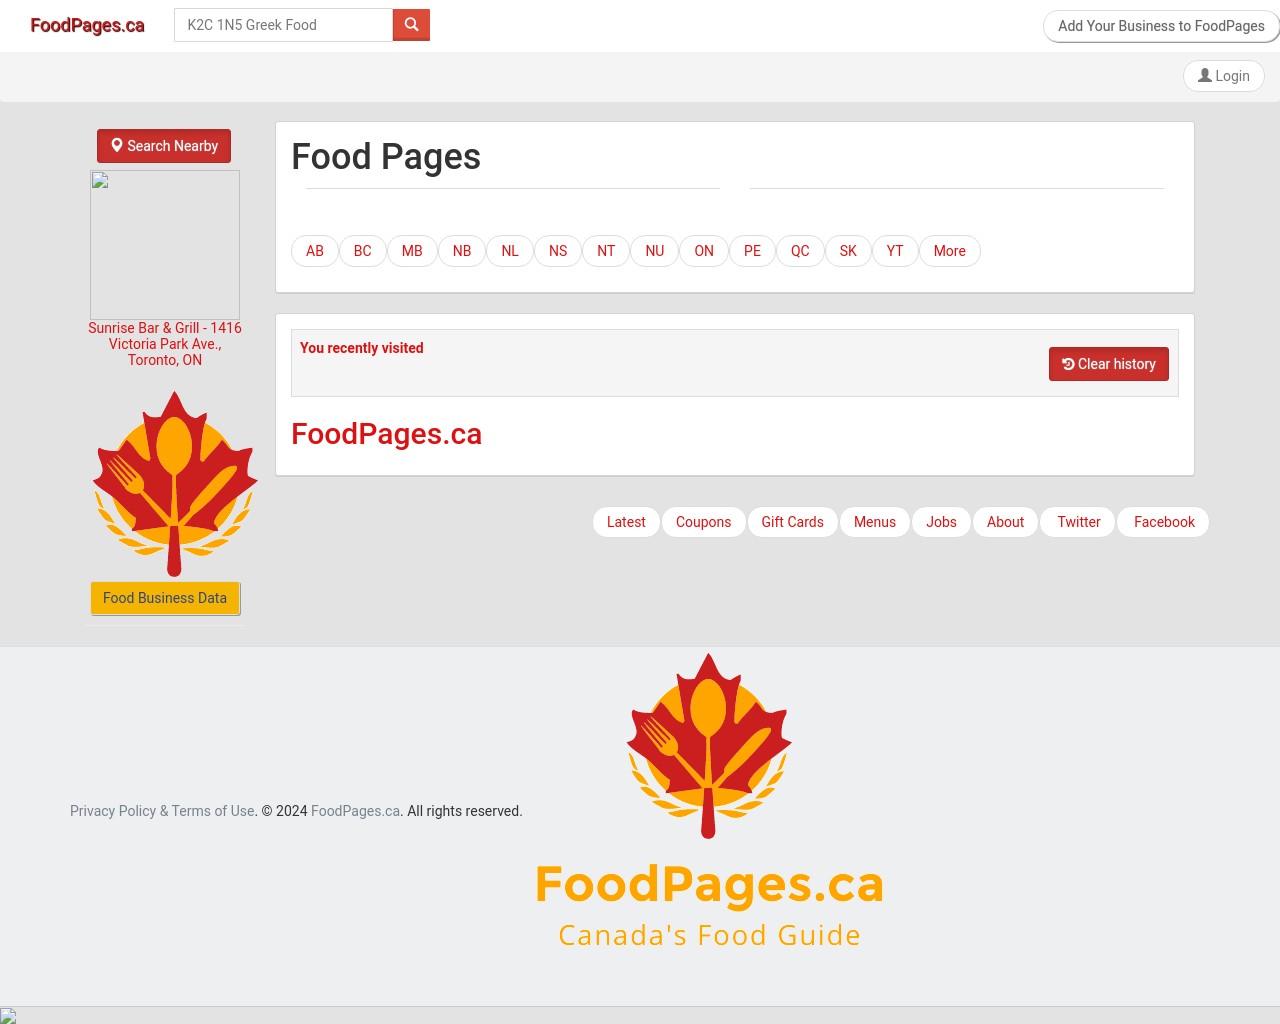 foodpages.ca